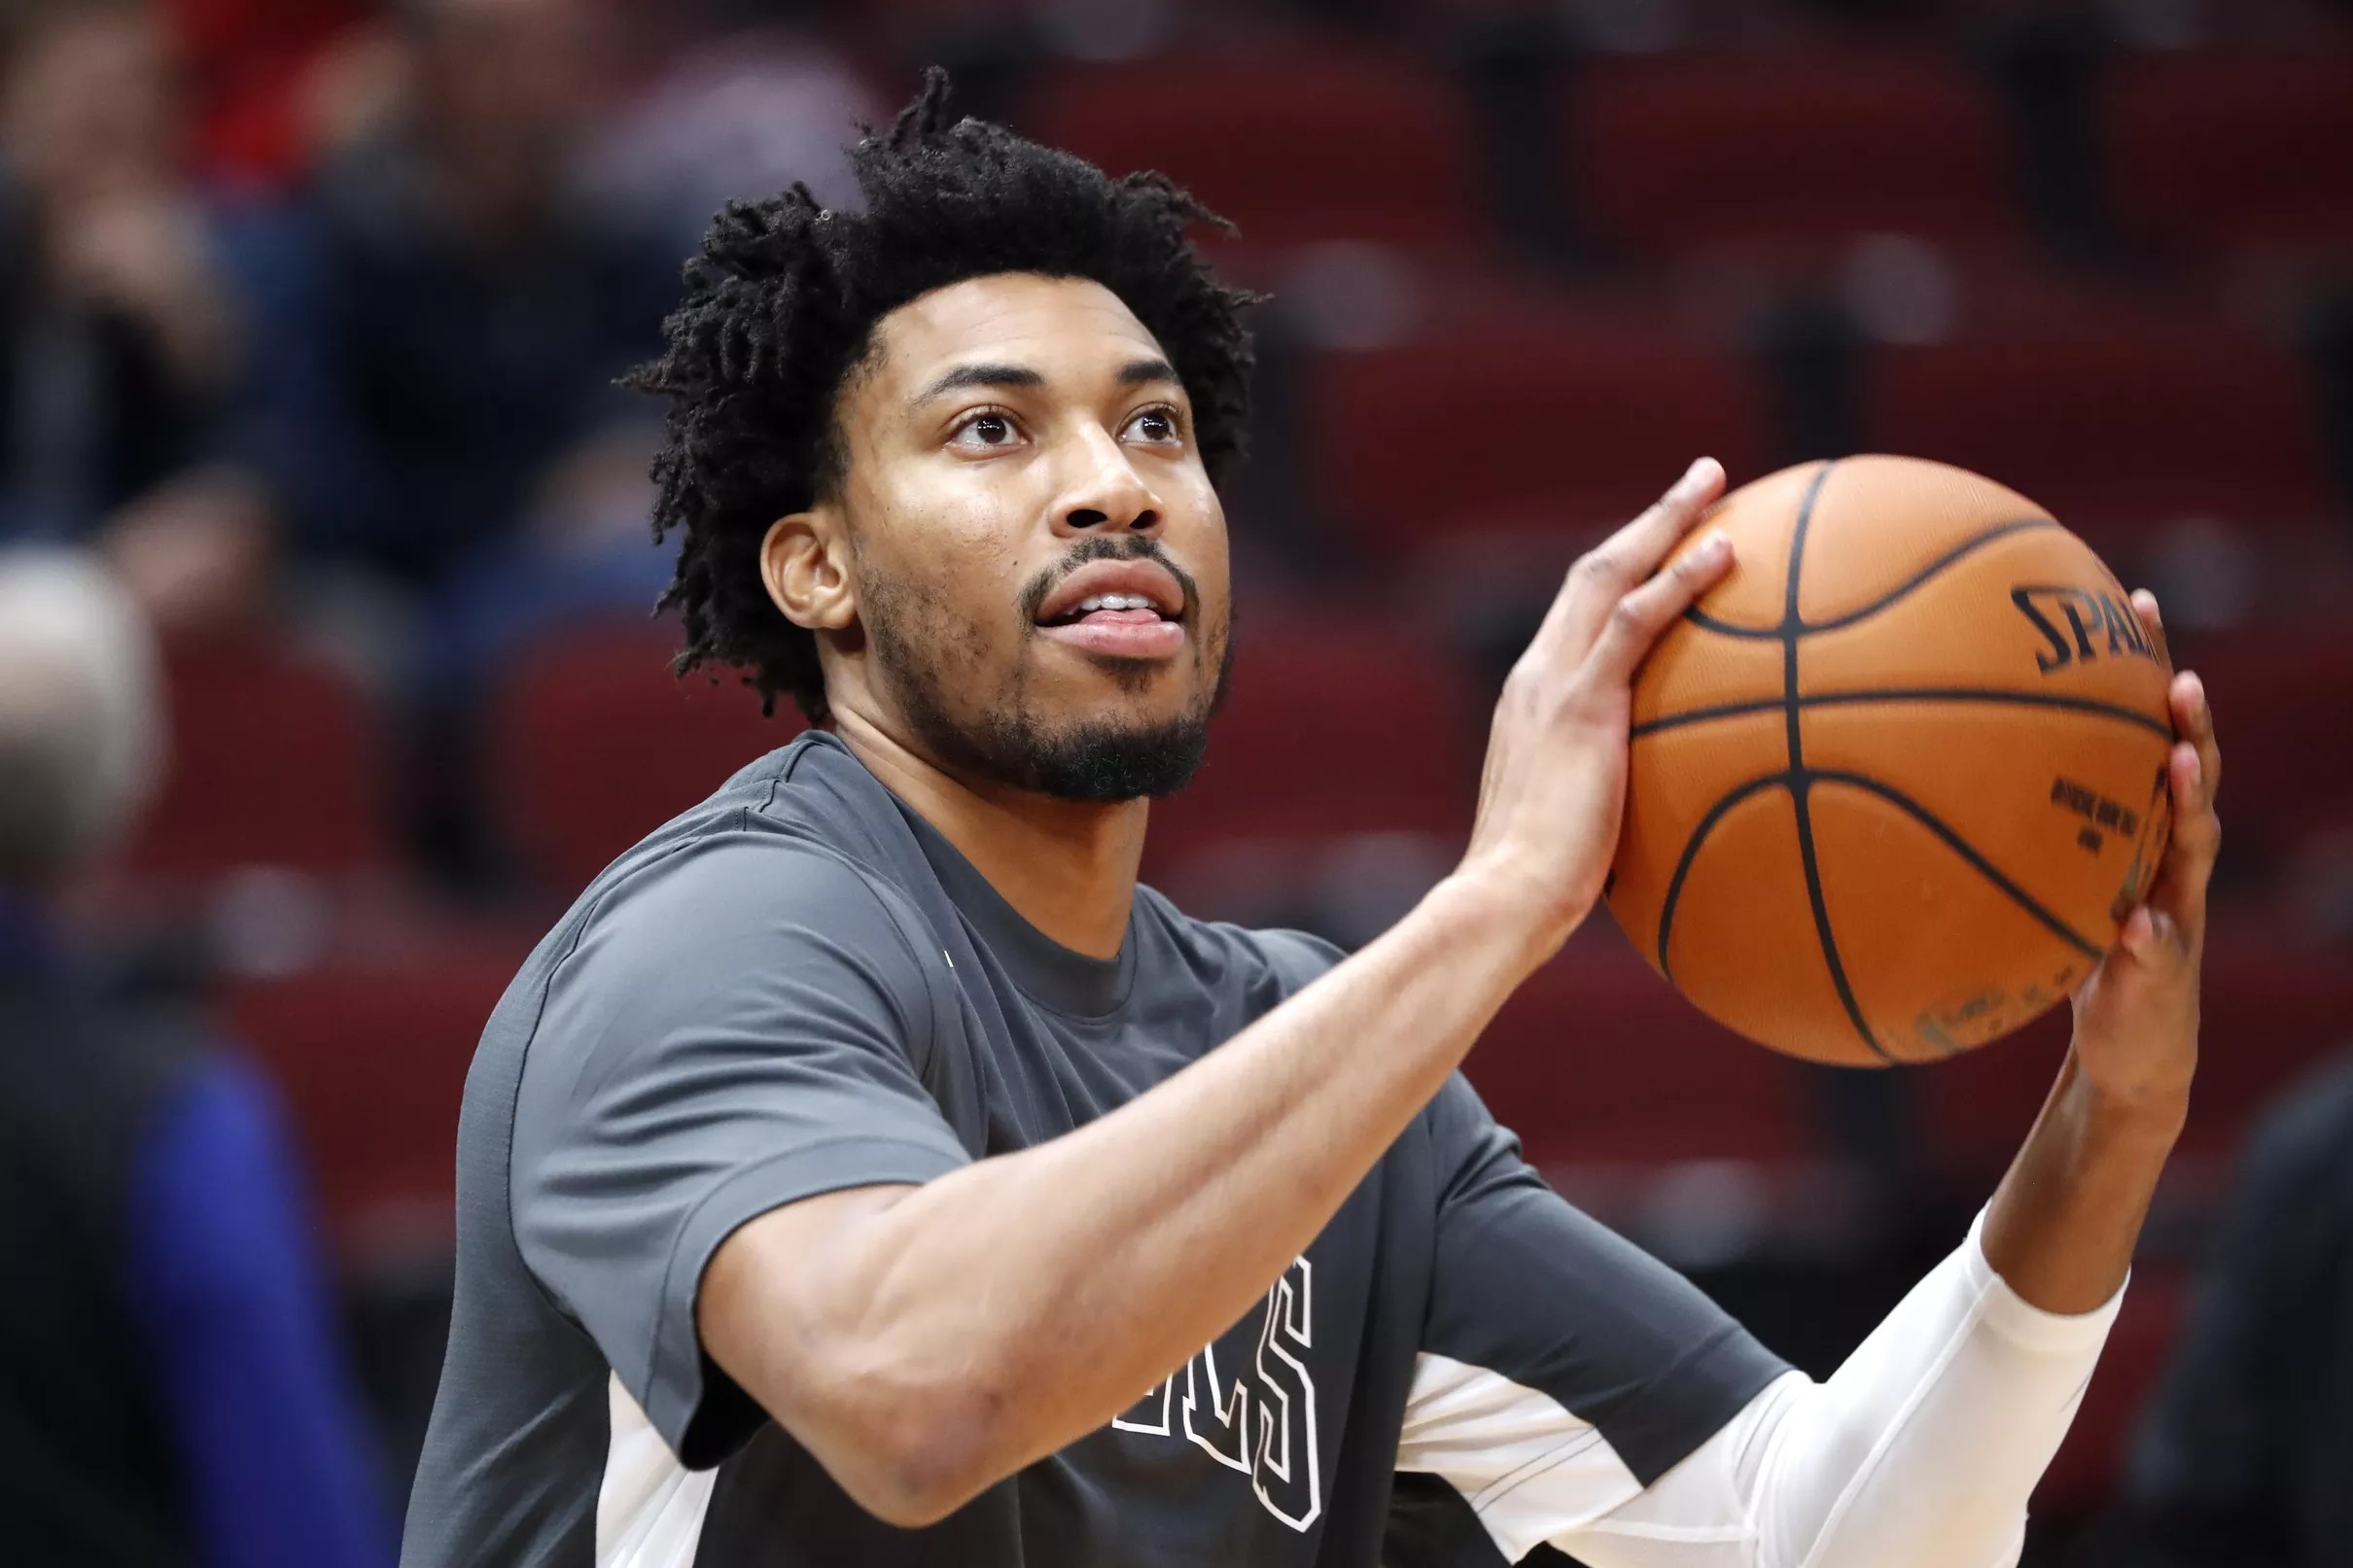 Bulls are working to better manage Otto Porter’s minutes.